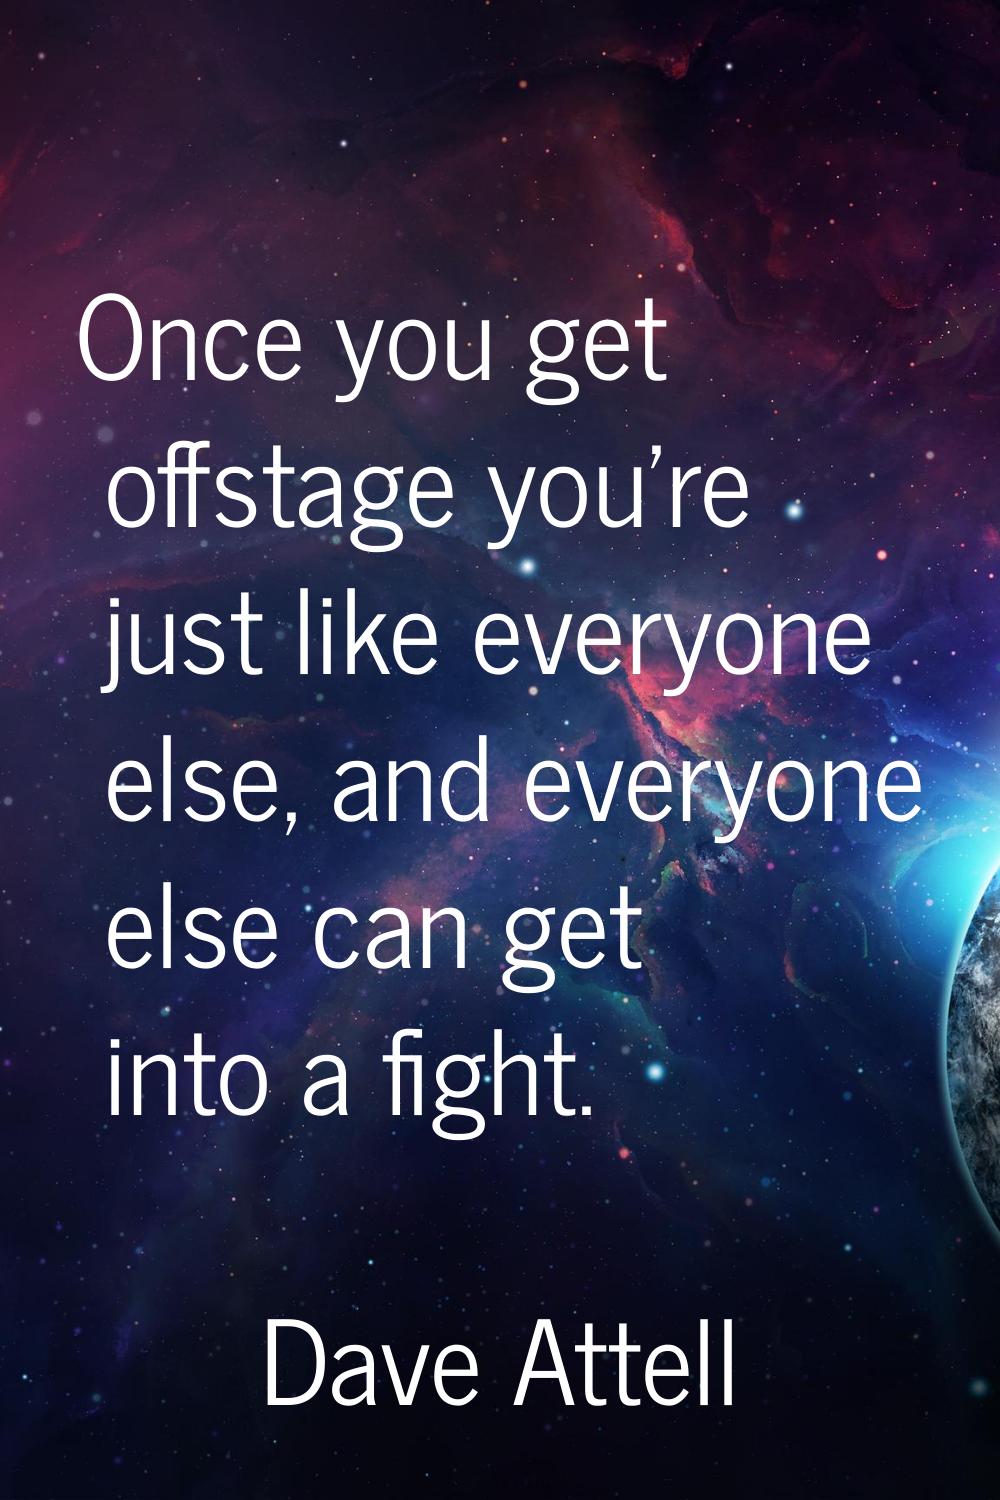 Once you get offstage you're just like everyone else, and everyone else can get into a fight.